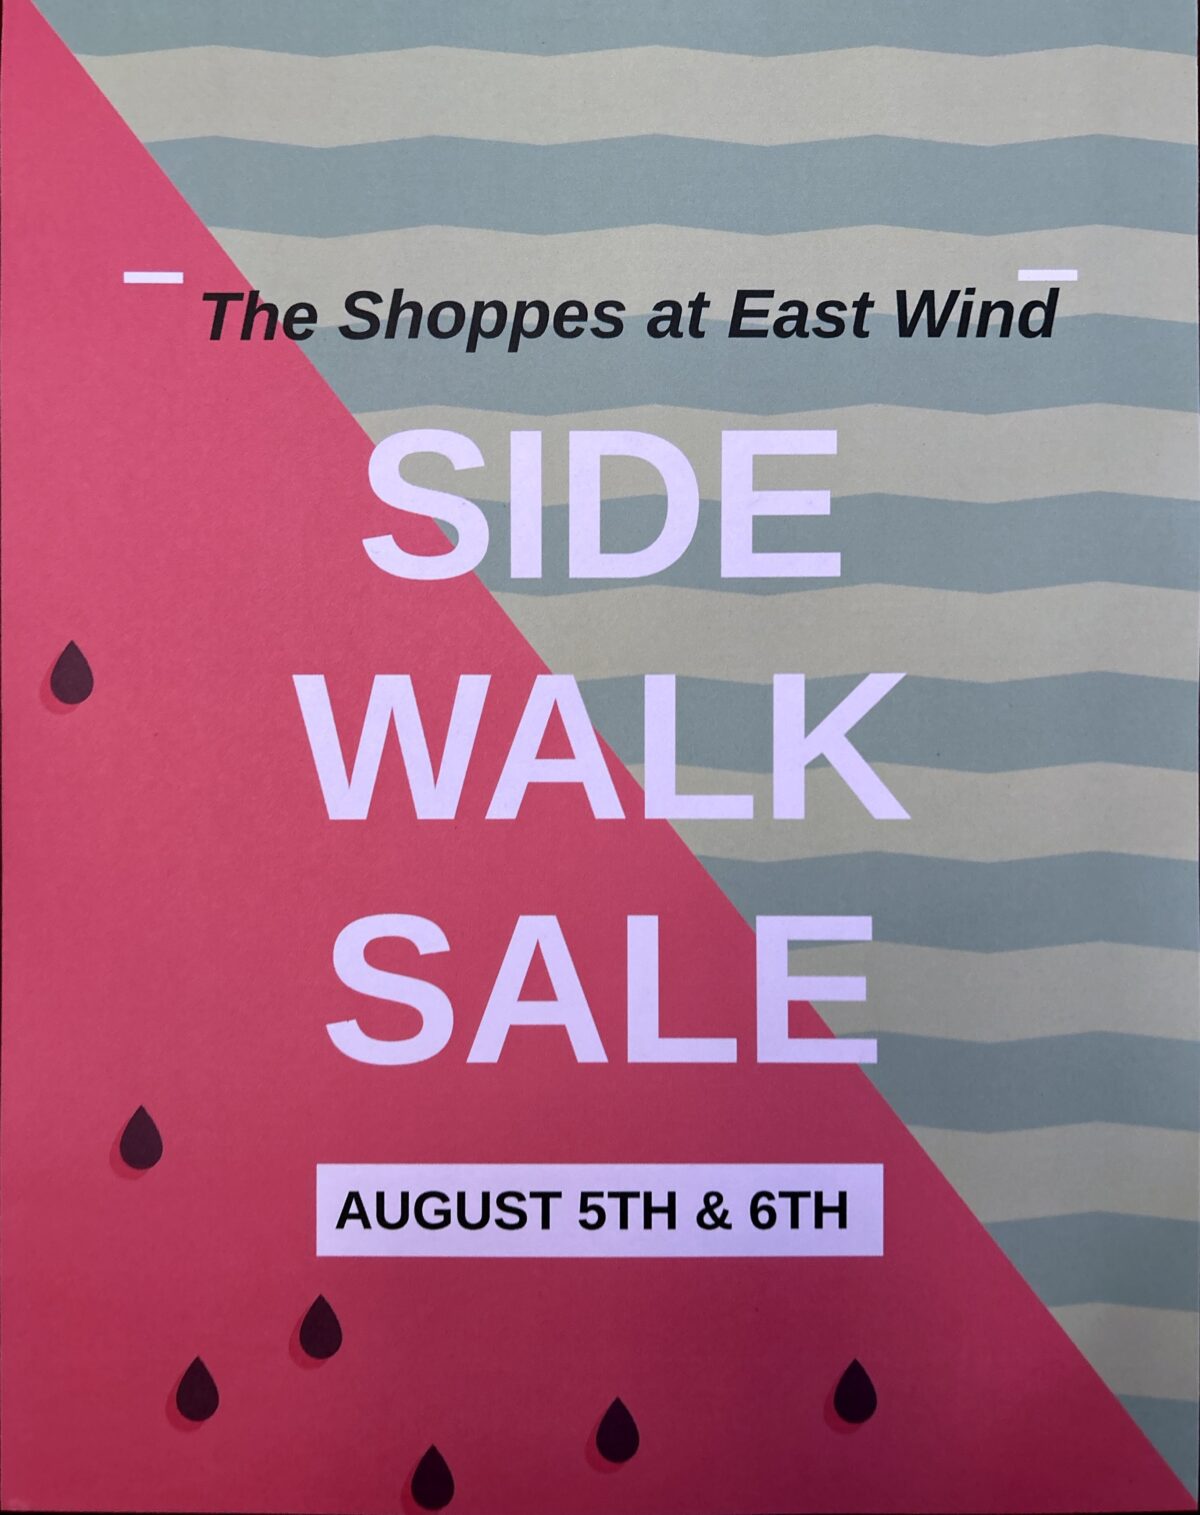 Side Walk Sale at The Shoppes